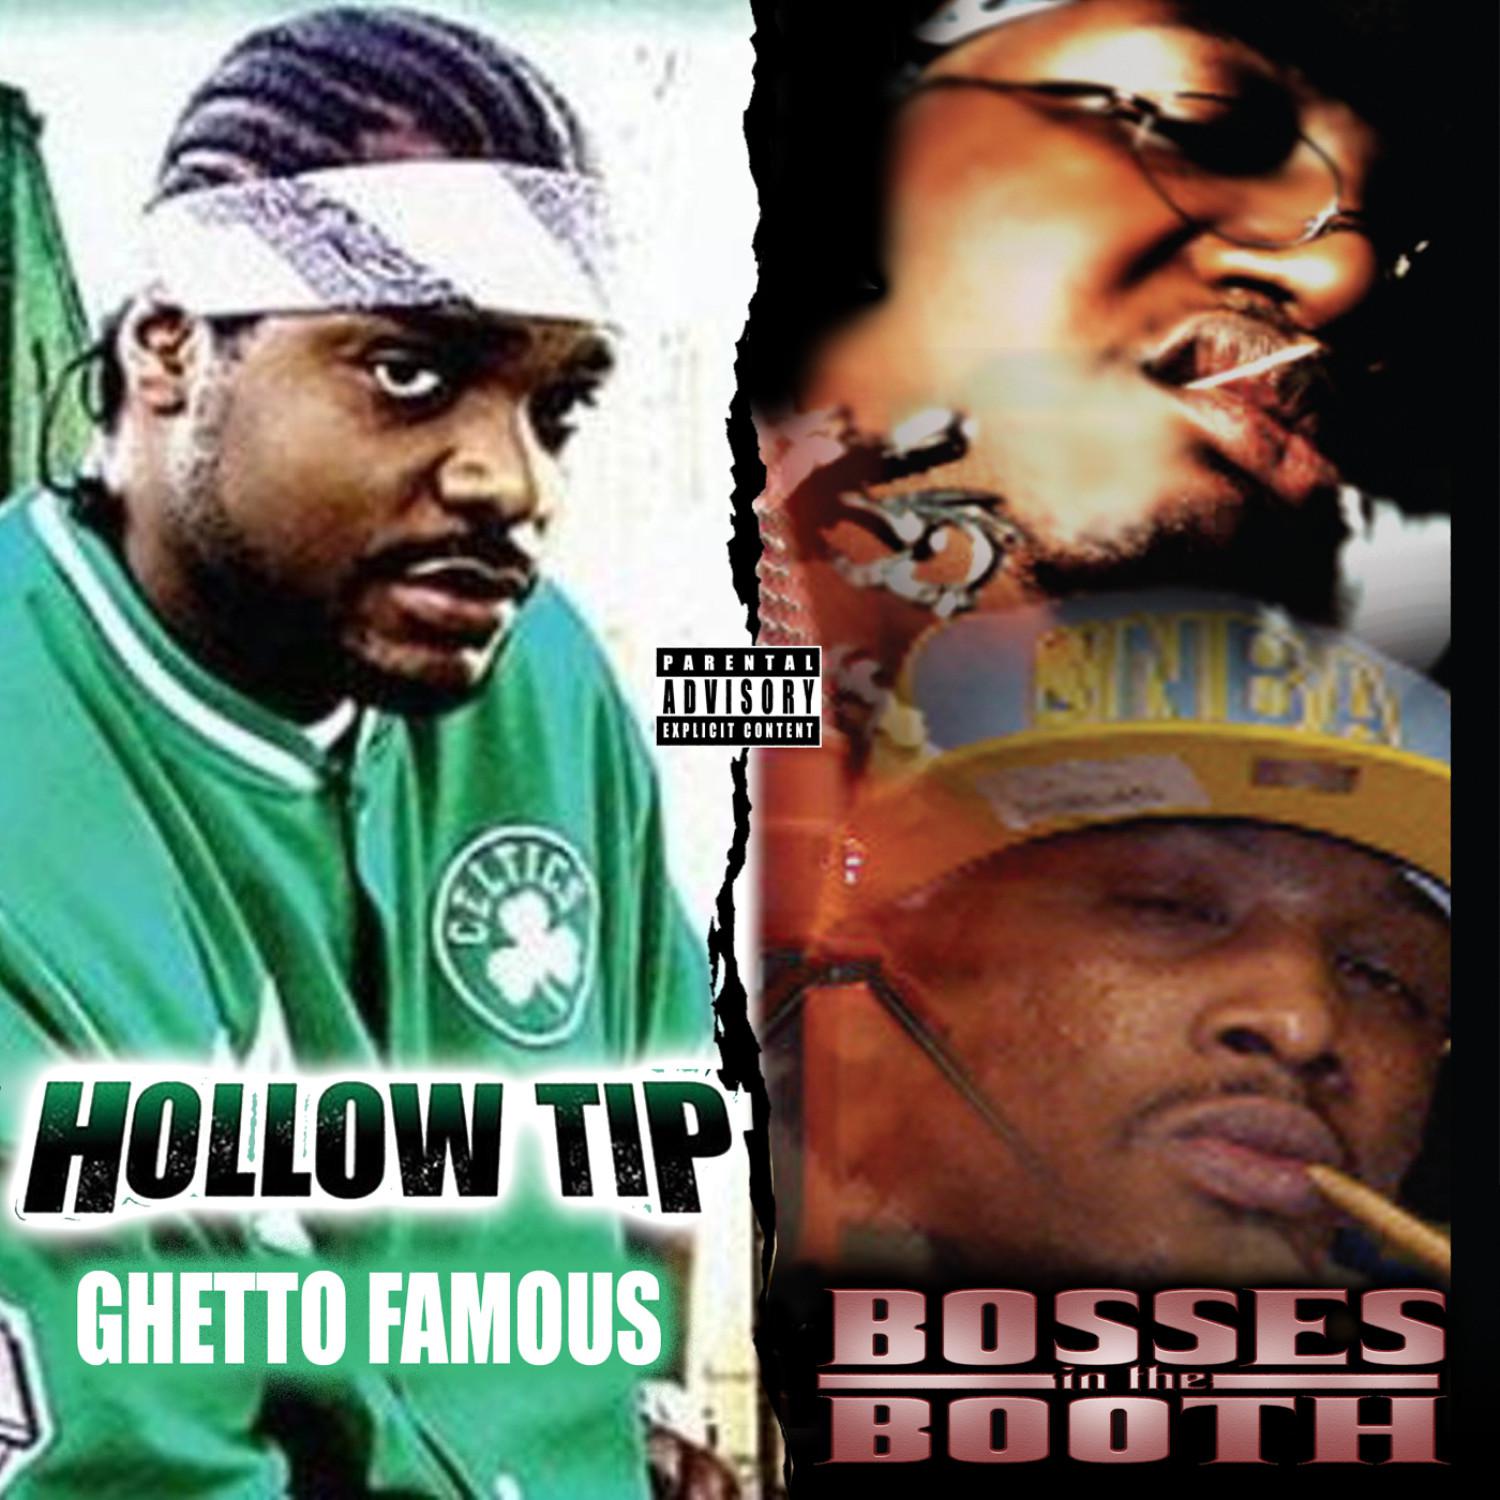 Ghetto Famous / Bosses In the Booth (2 For 1: Special Edition)